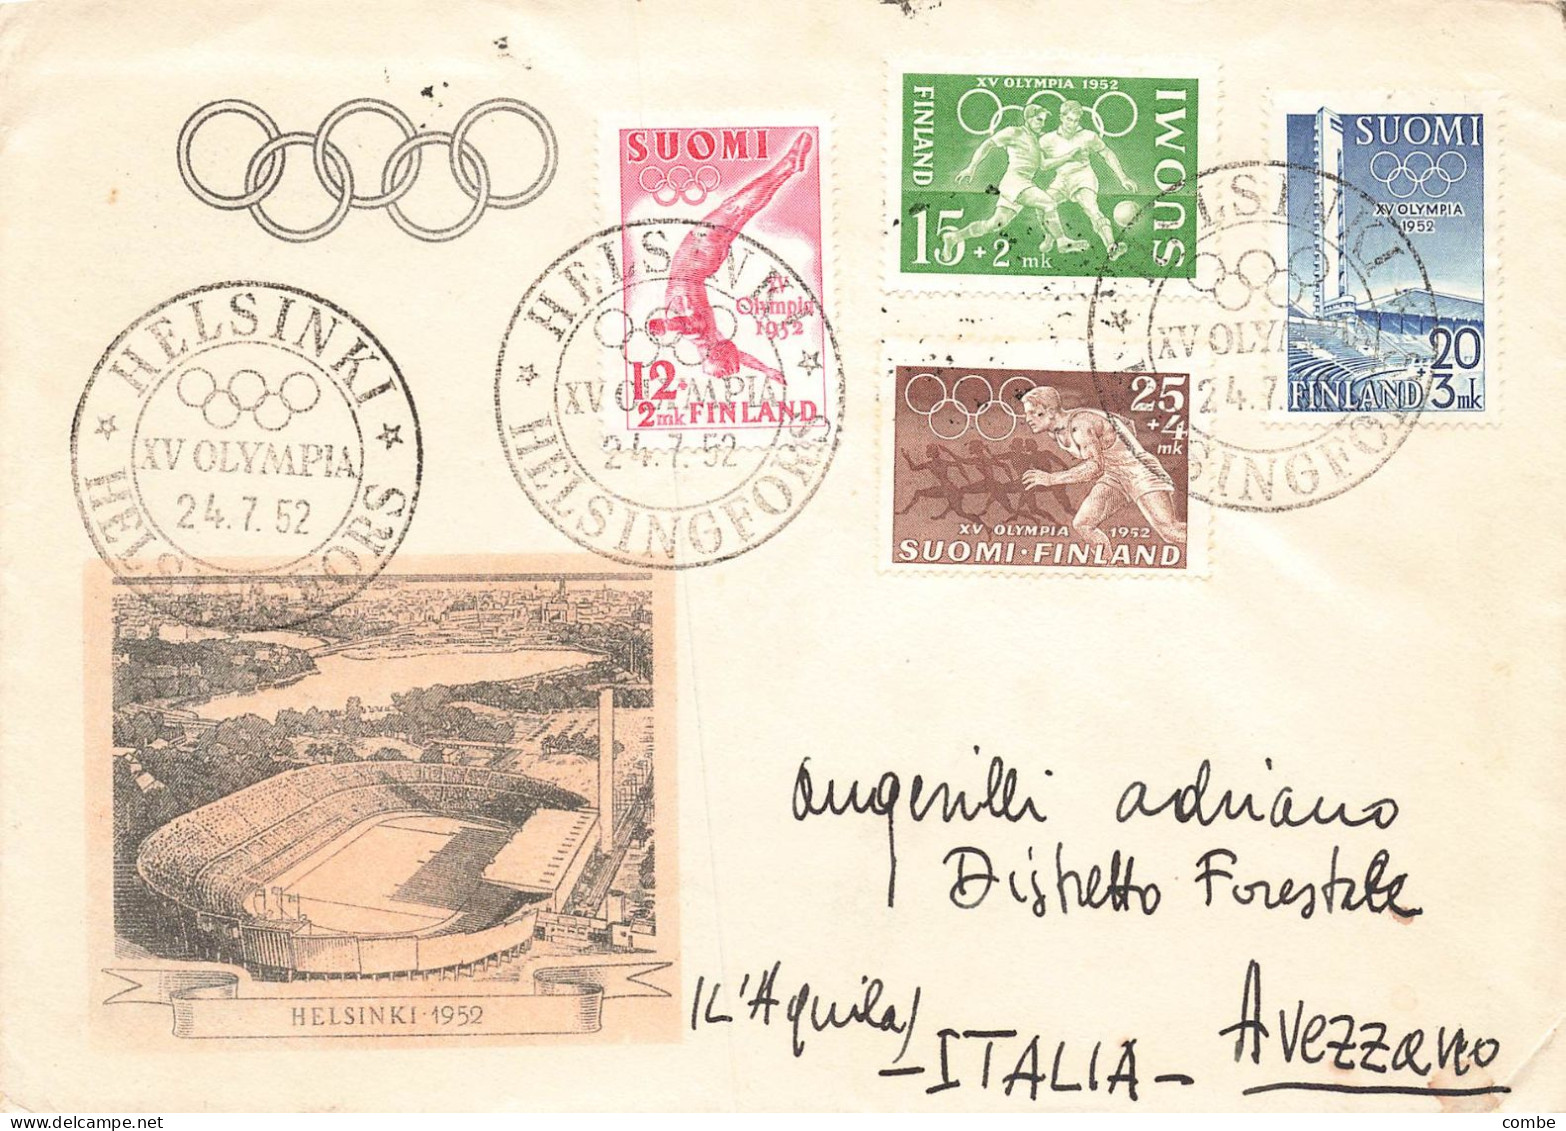 FINLANDE. FDC. OLYMPIC GAMES. HELSINKI. 24 7 52   / 2 - Lettres & Documents